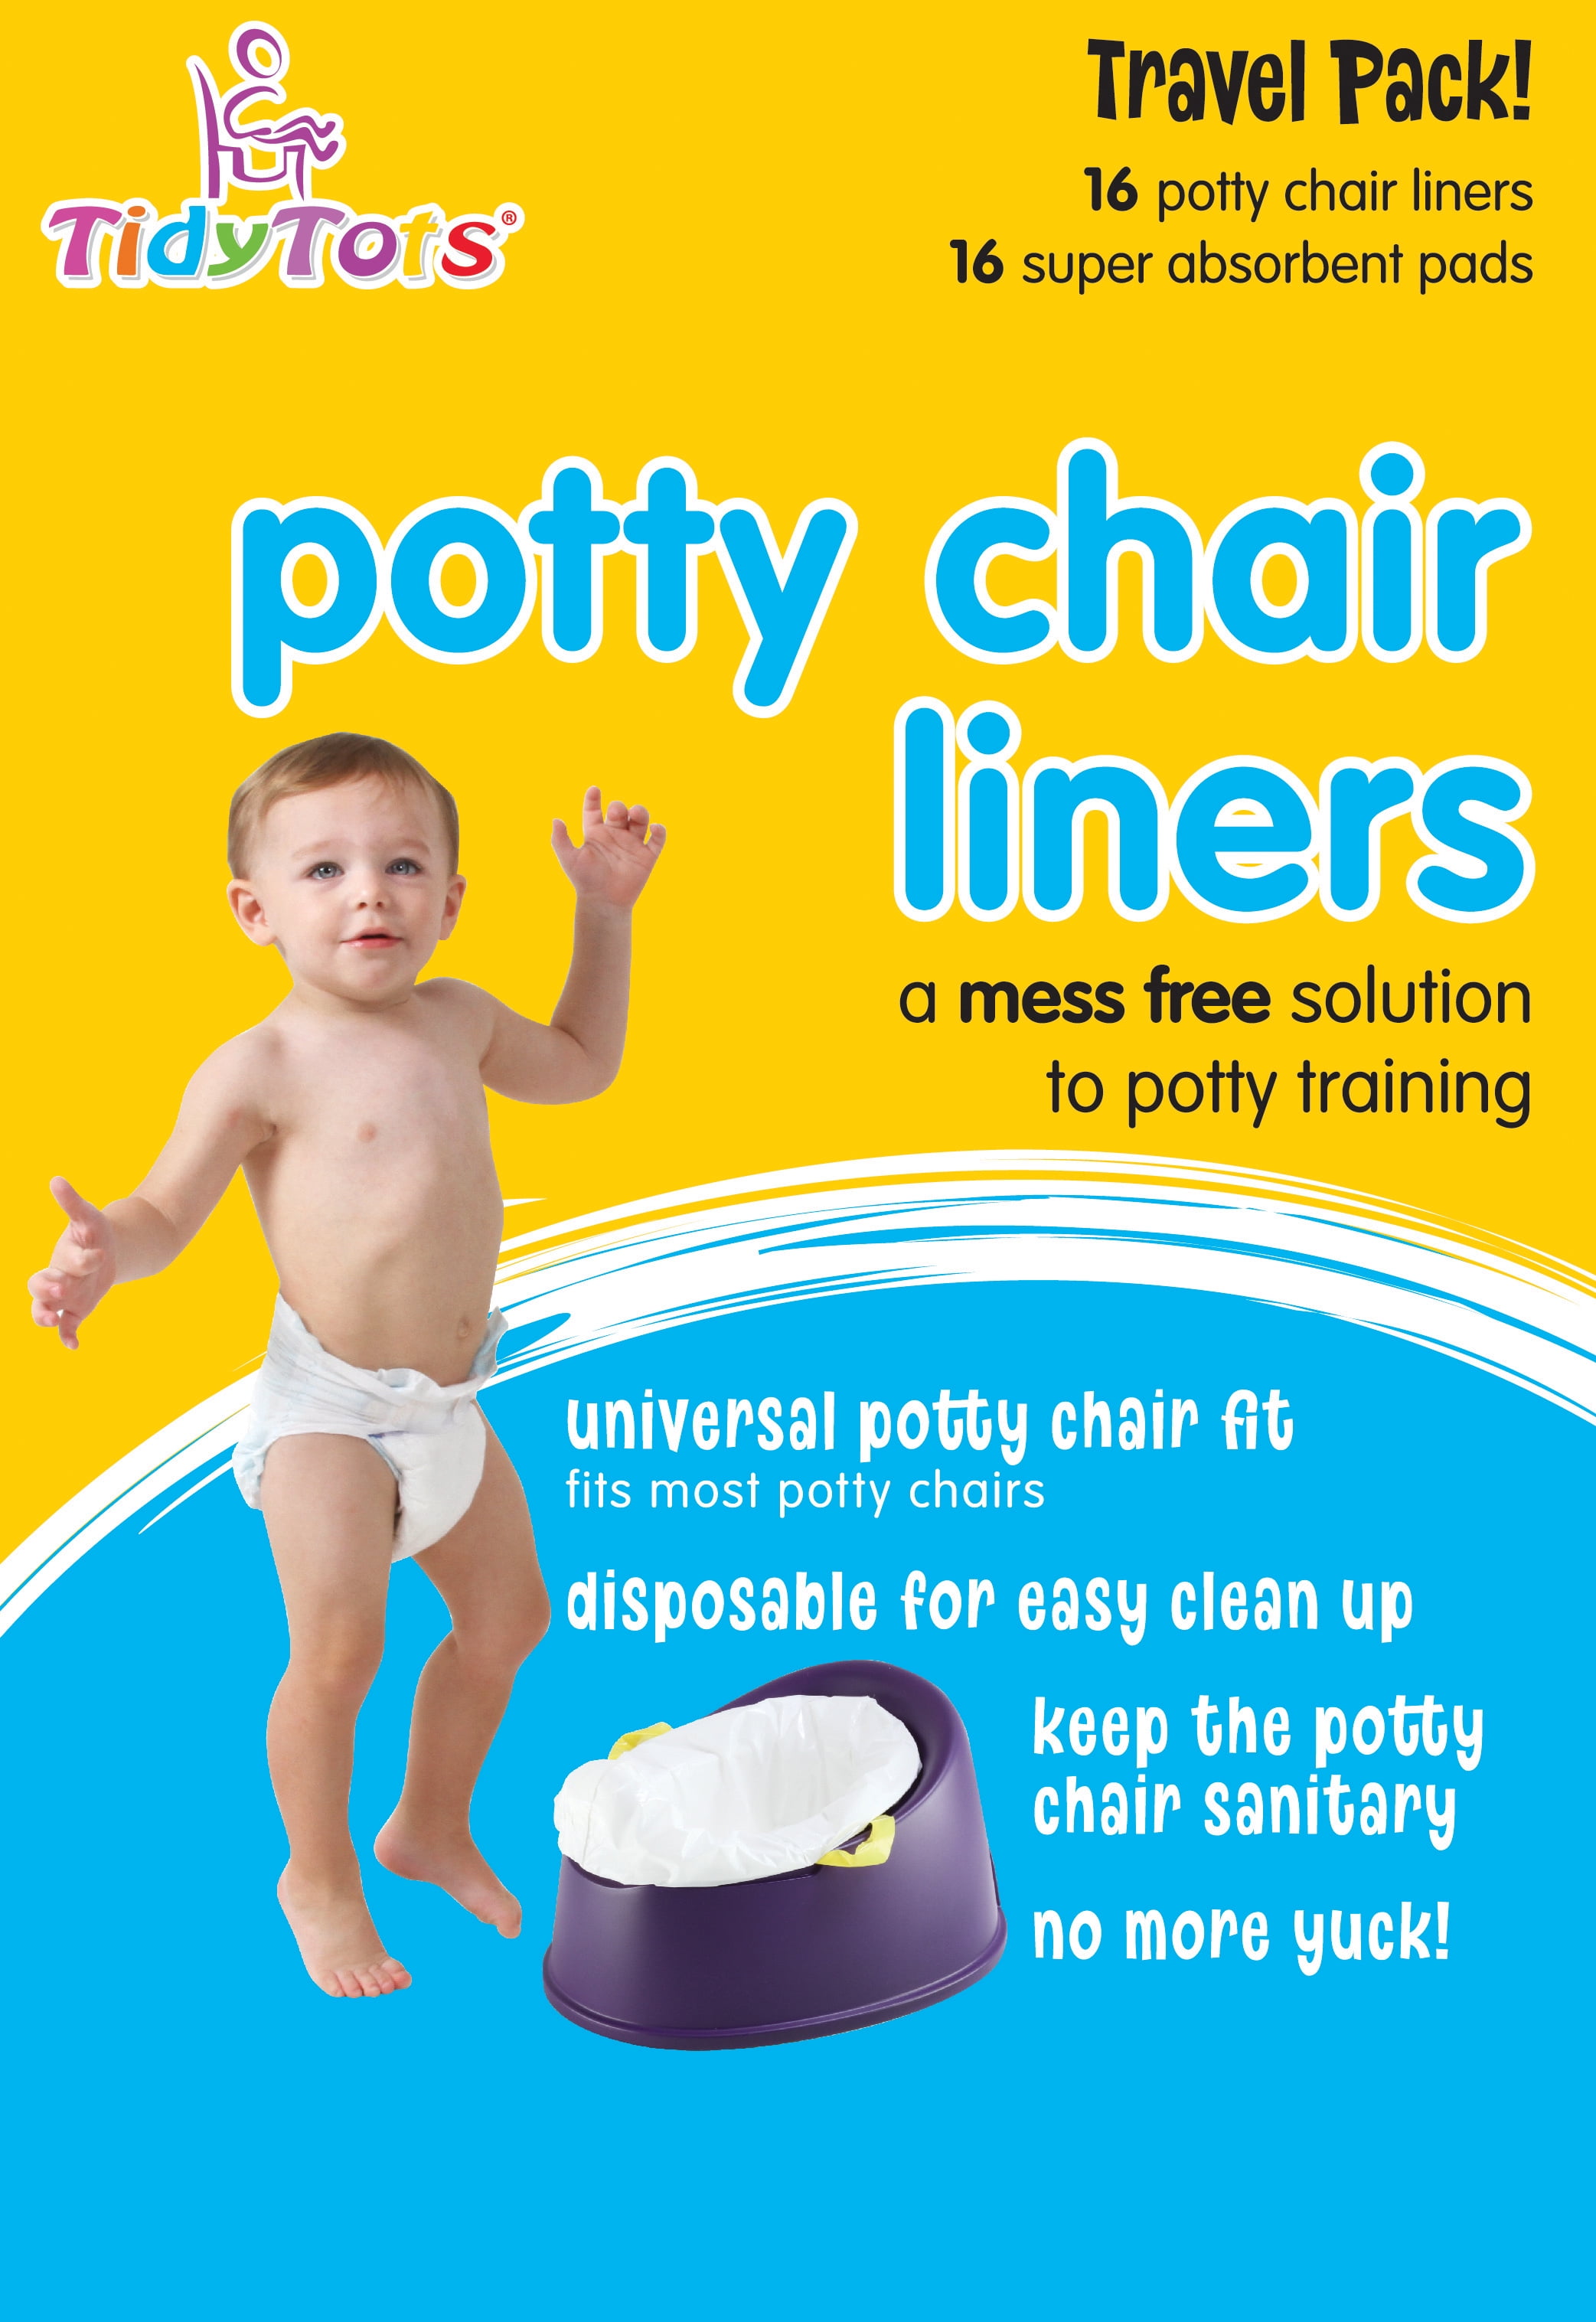 Babyway Disposable Travel Potty Linersx 10 Throw Away Potty Training Liners 